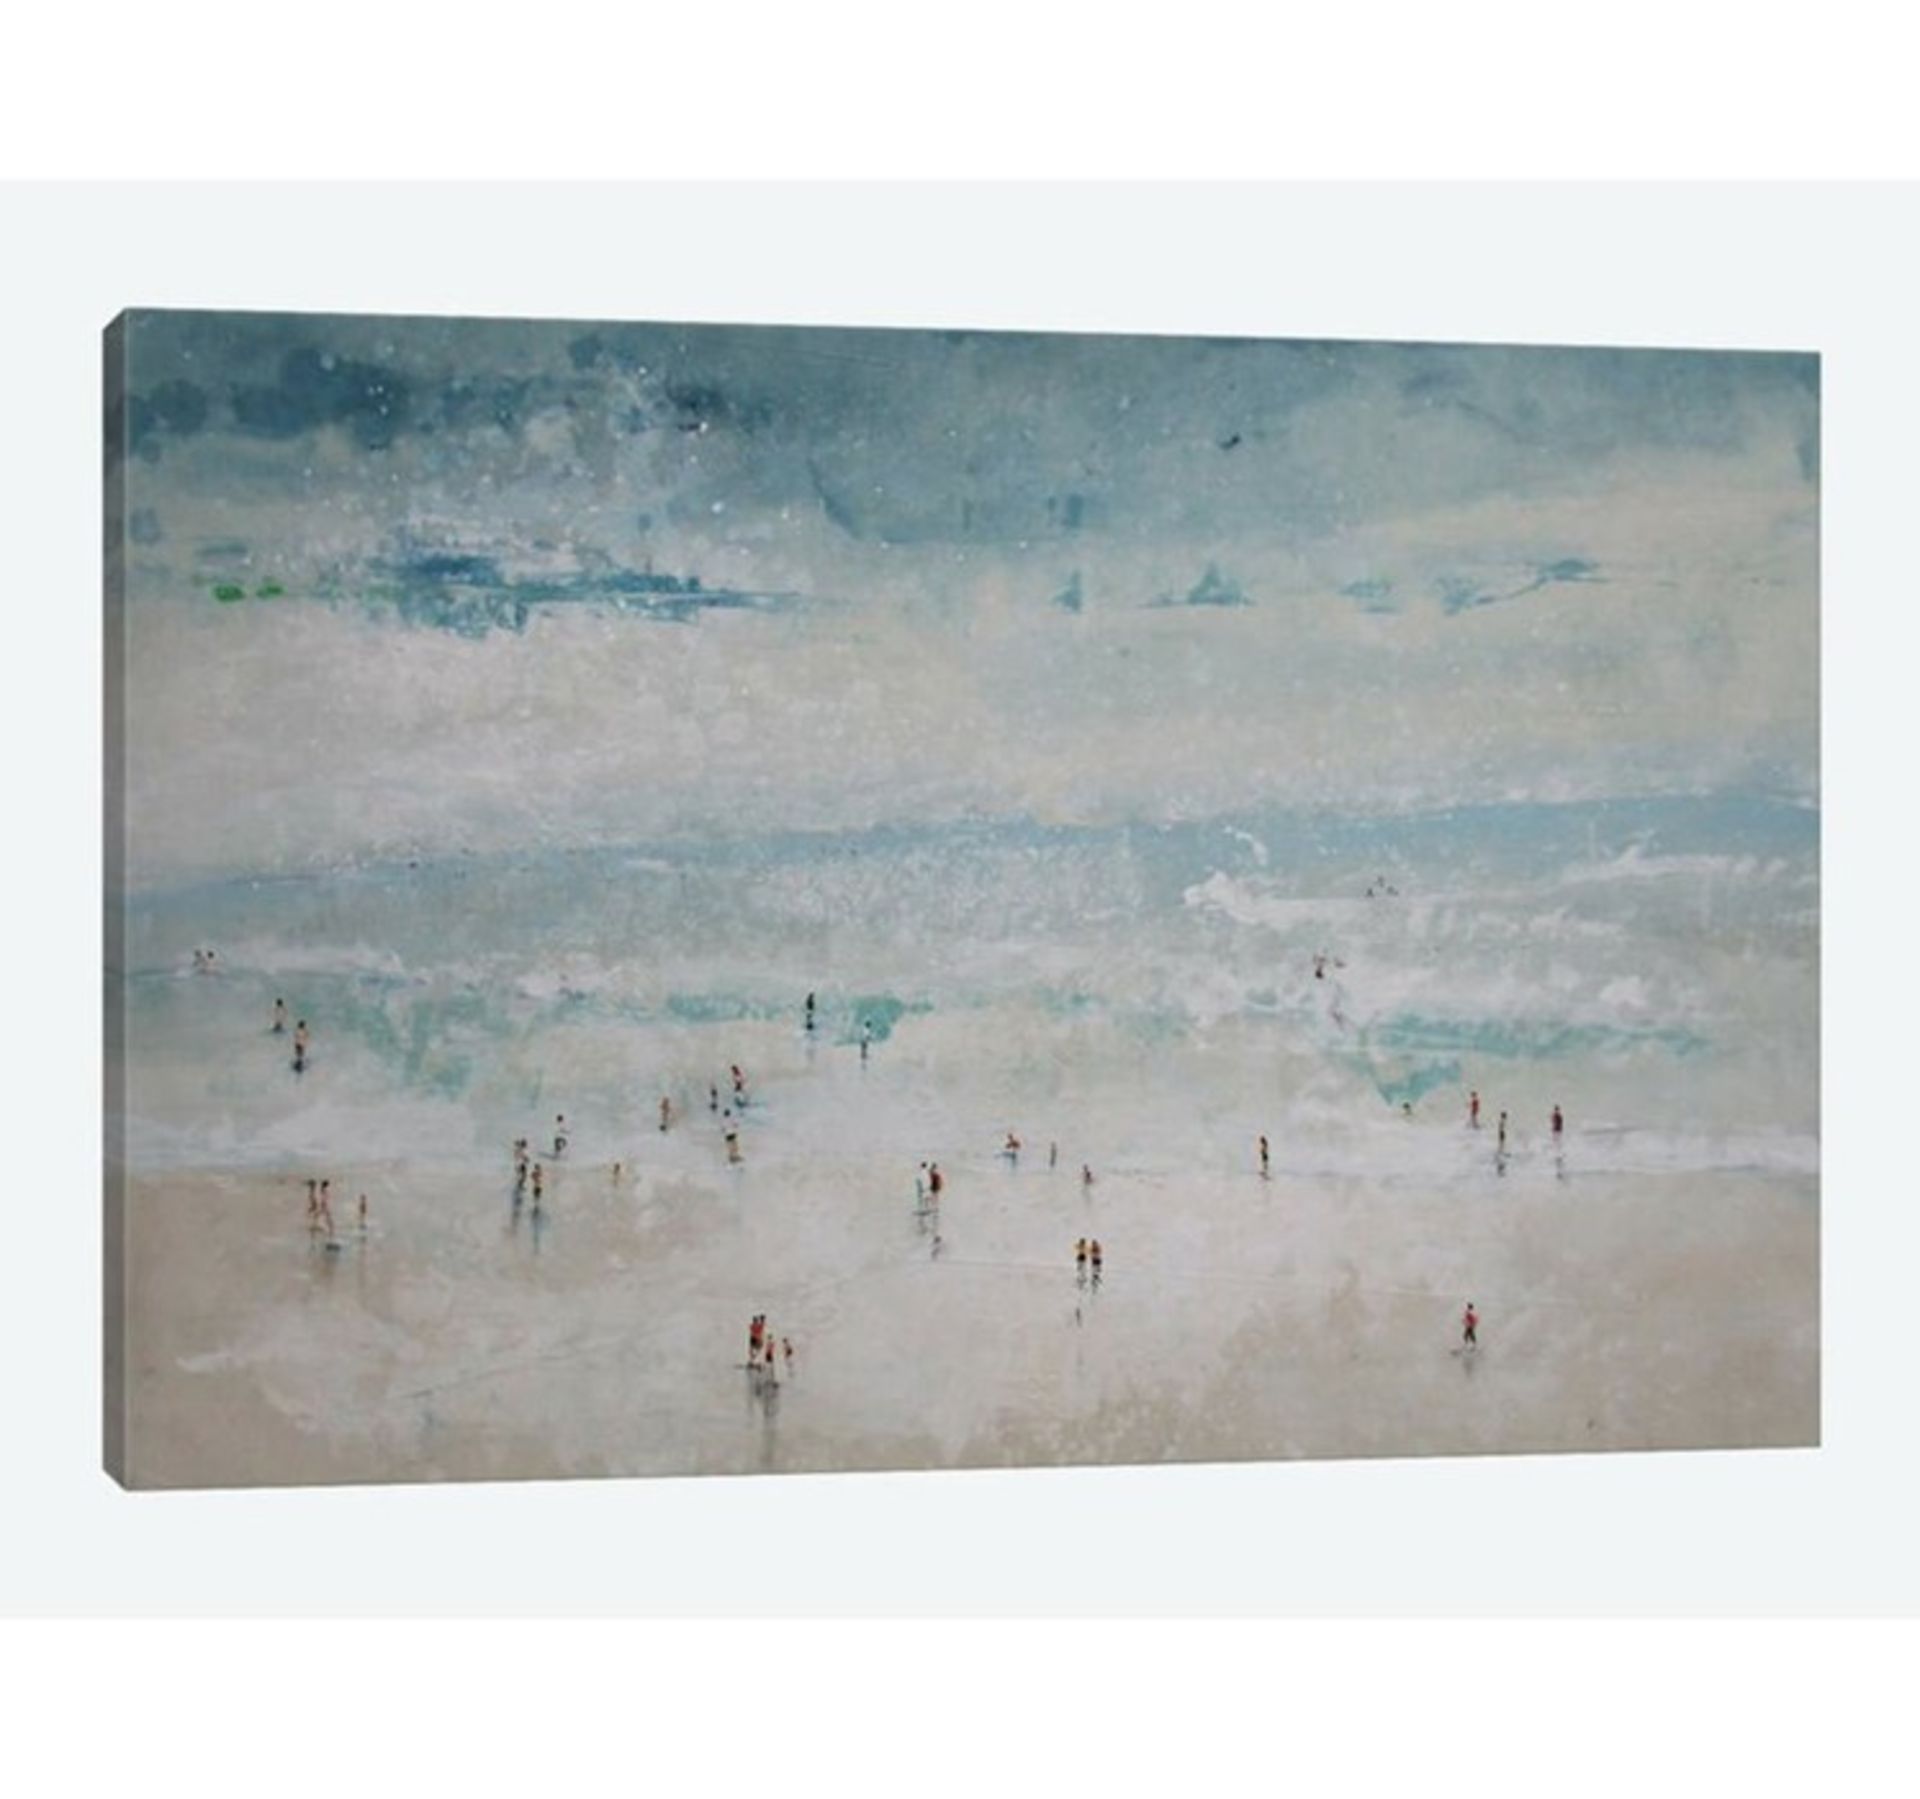 Beachcrest Home,'The Beach' by Claudio Missagia Graphic Art Print on Wrapped Canvas - RRP £75.99 (